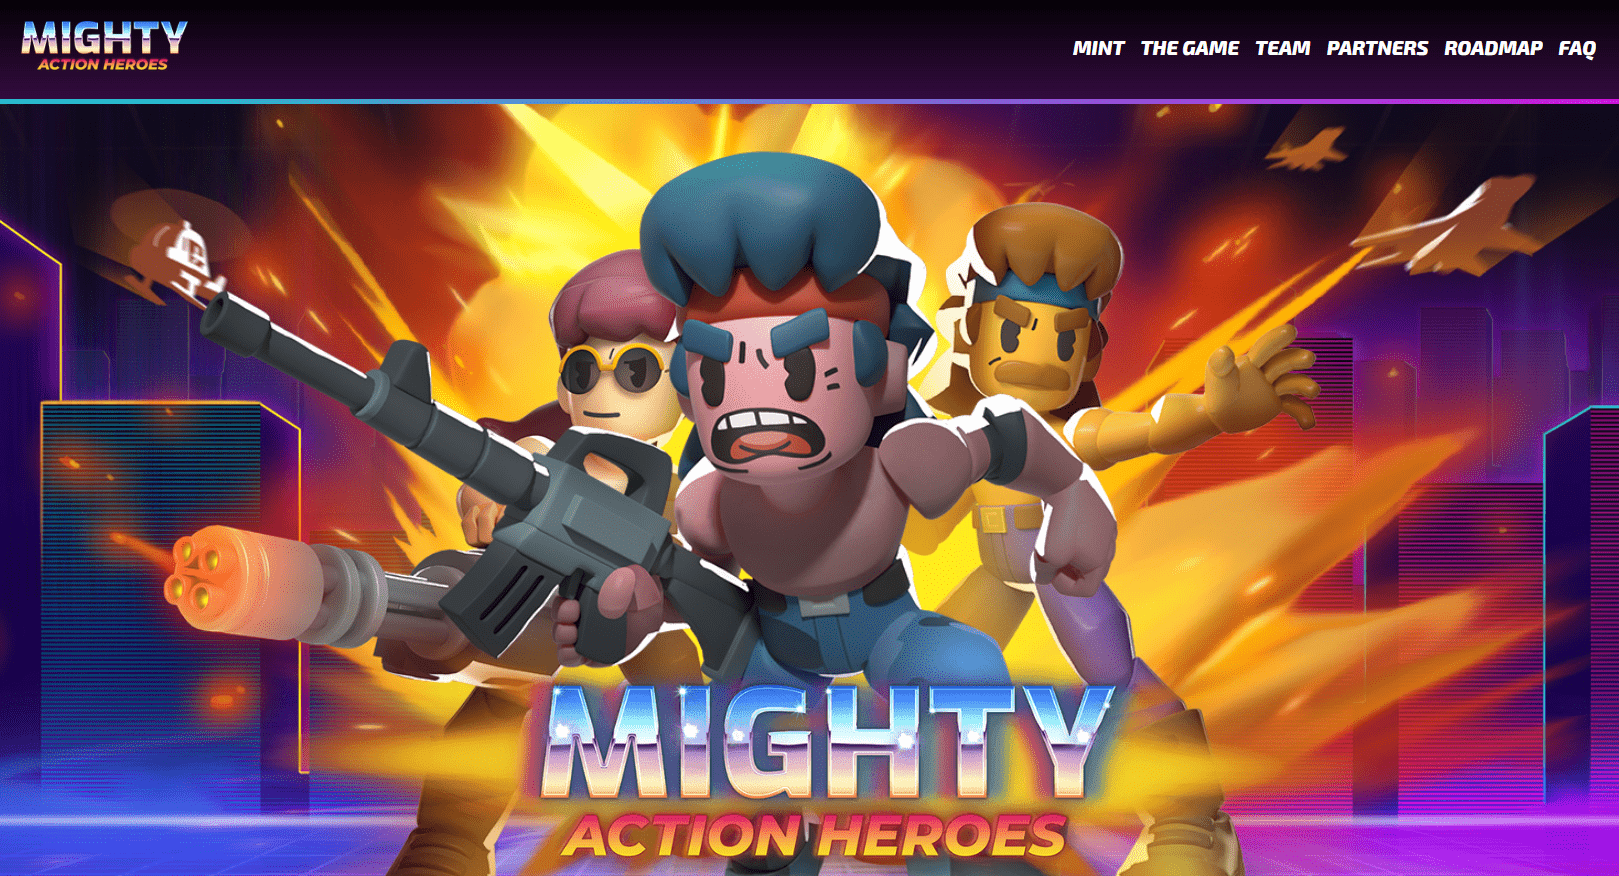 What are mighty action heroes?